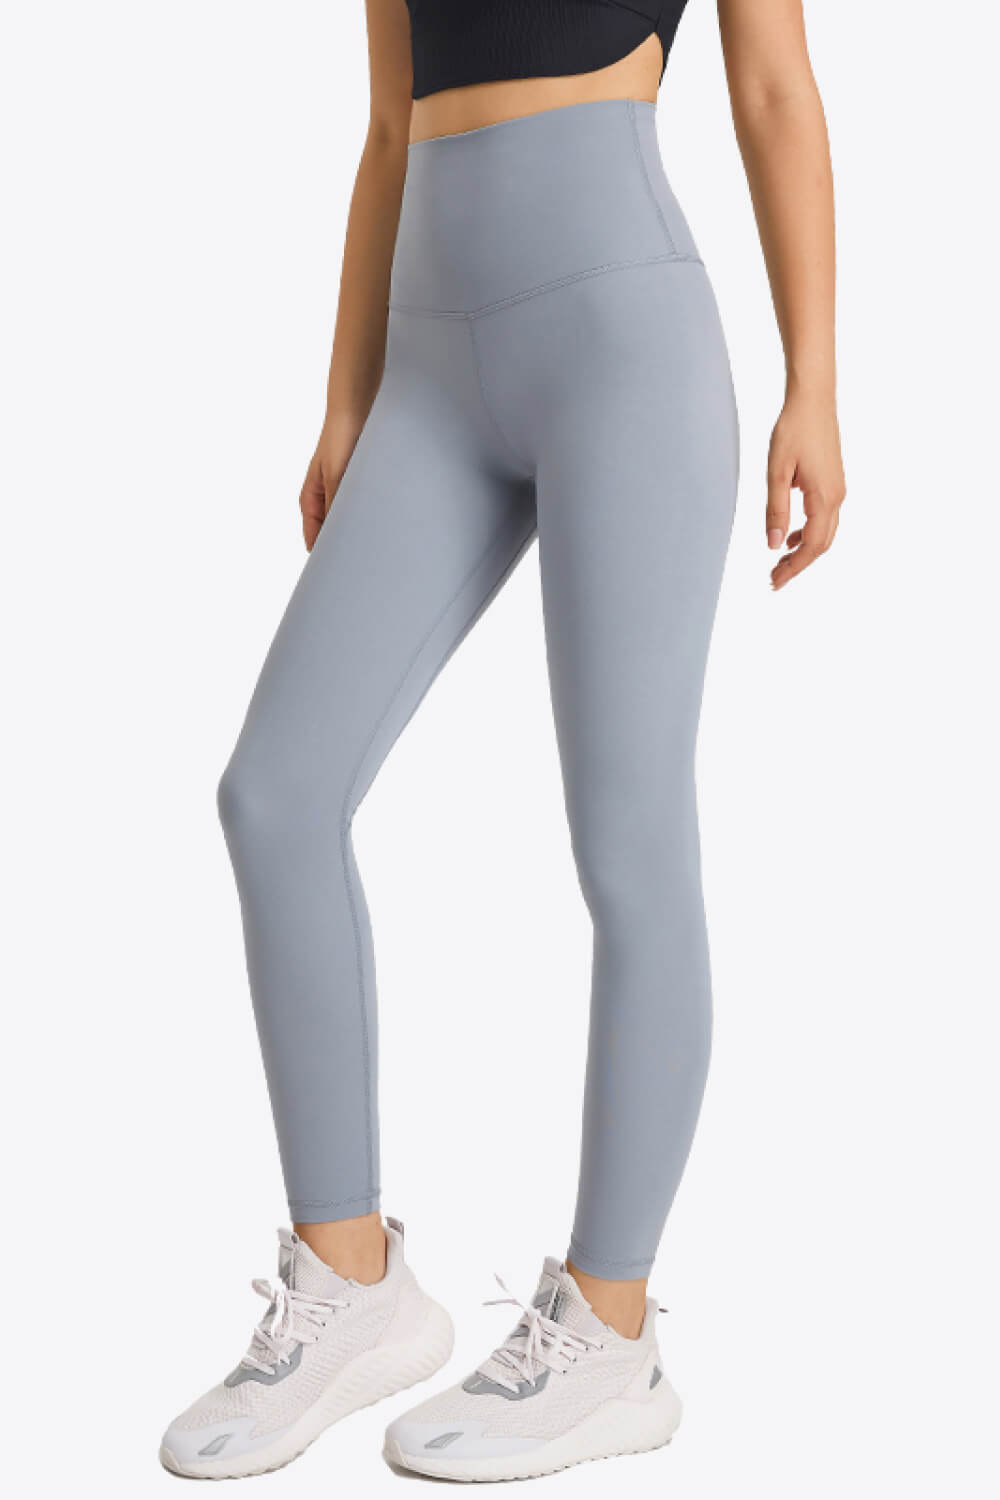 HSR Seamless Soft Cotton Leggings for Women - High Waisted Tummy Control No  See Through Workout Yoga Pants ((26-30 Inch), Gray) : Amazon.in: Fashion